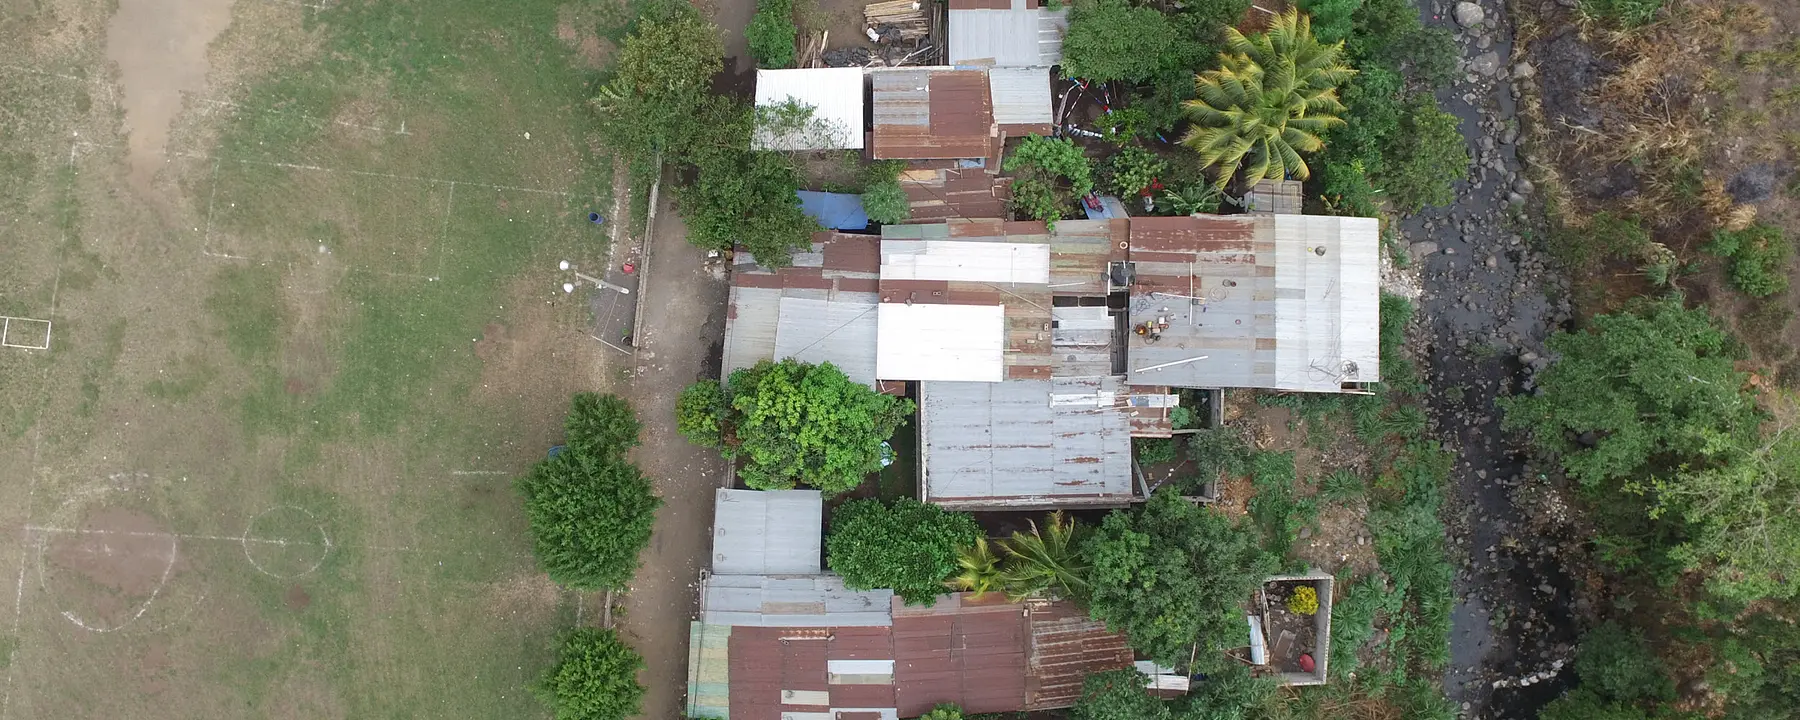 Aerial photo of a housing area in rural Guatemala taken by a research drone